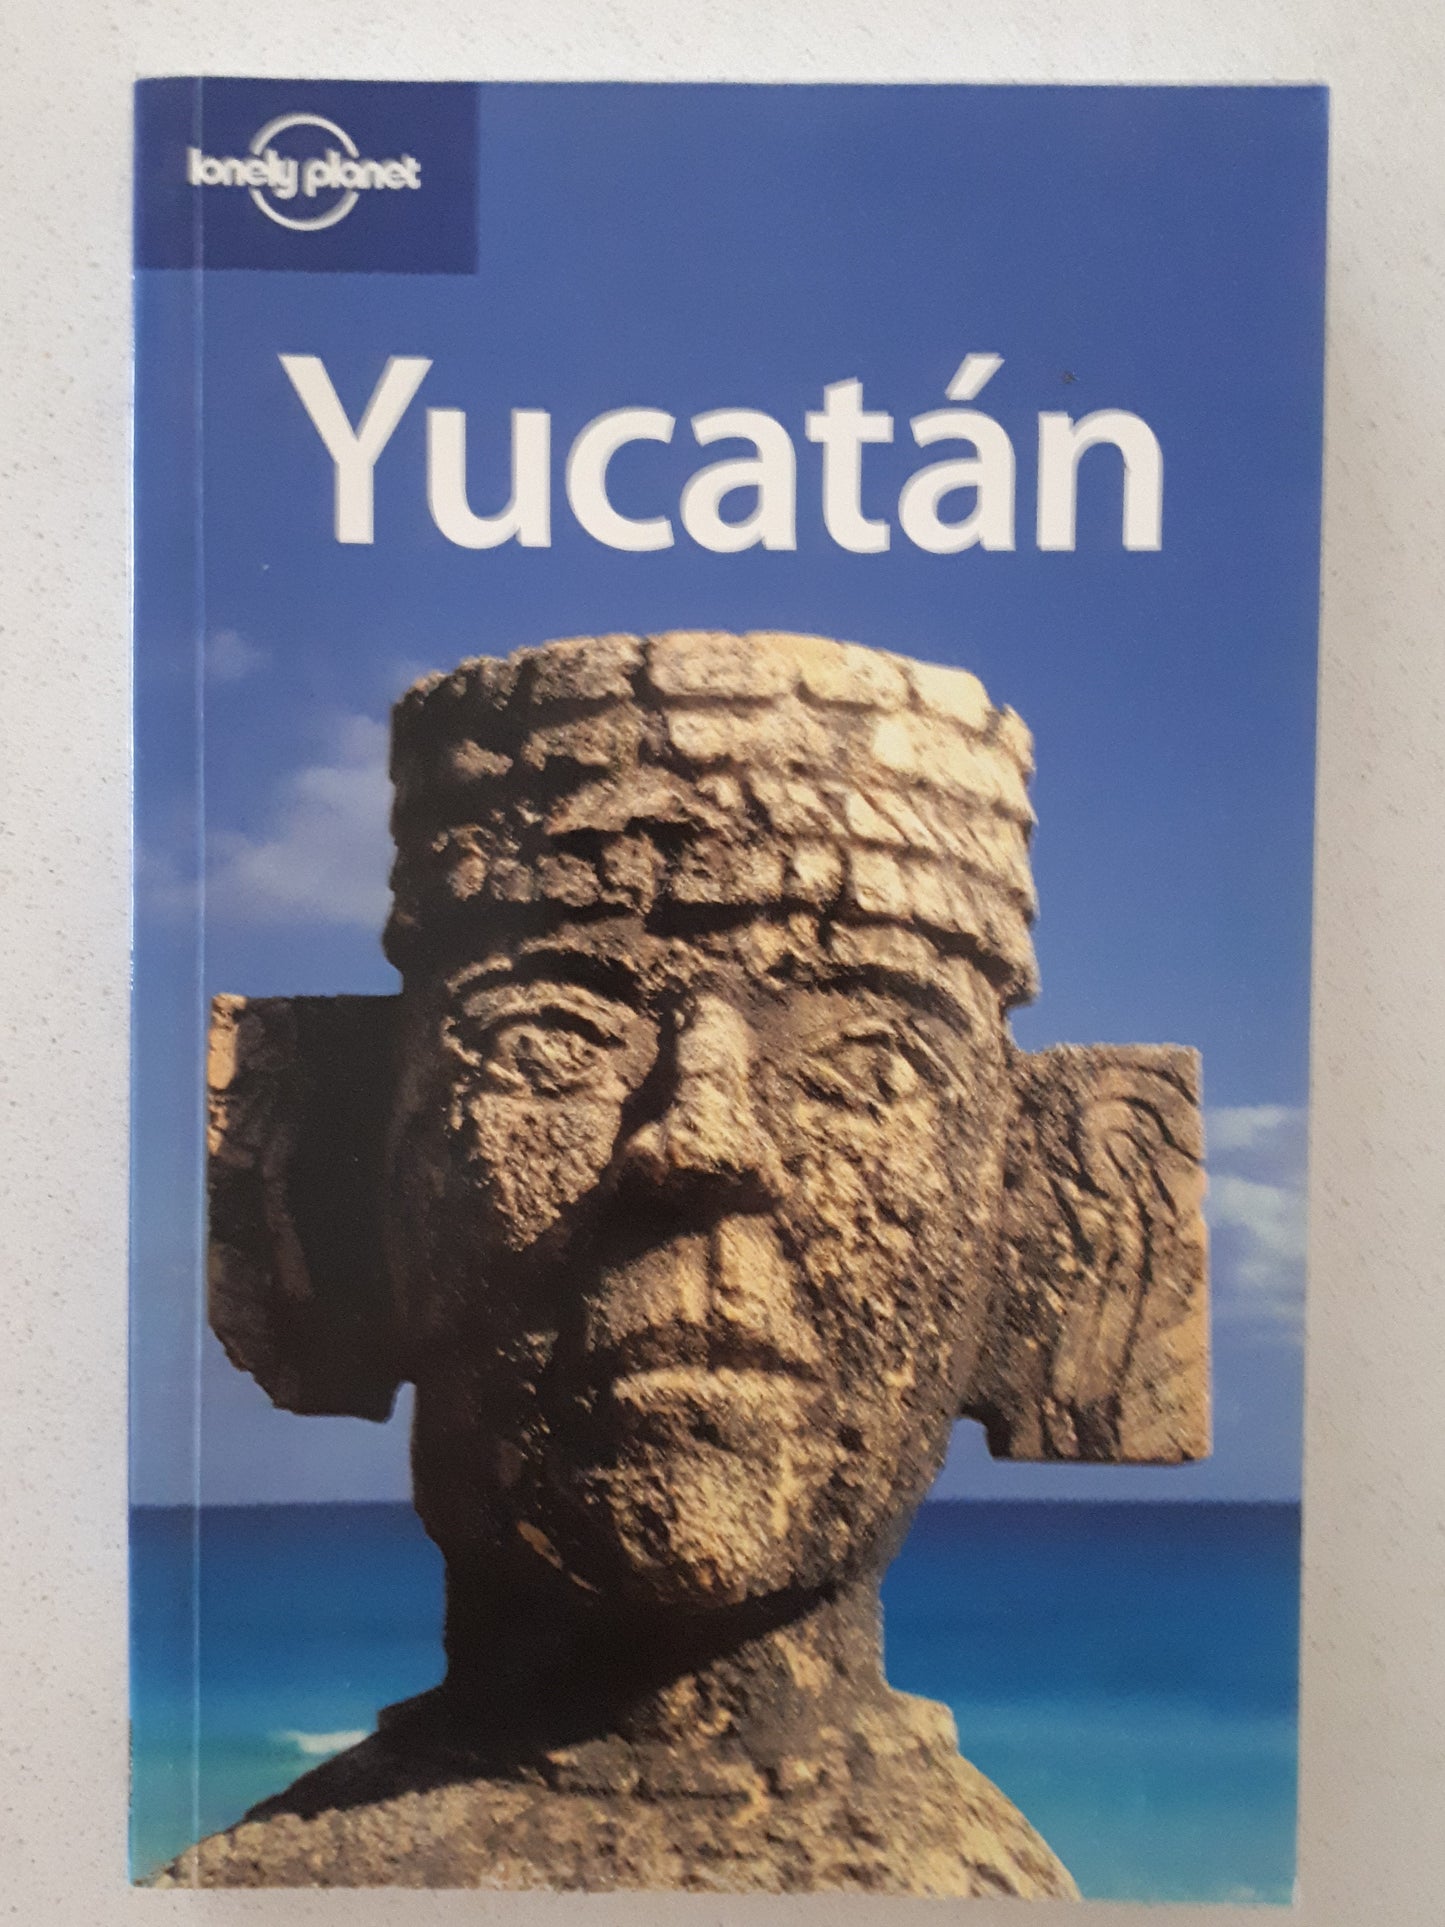 Yucatan by Lonely Planet